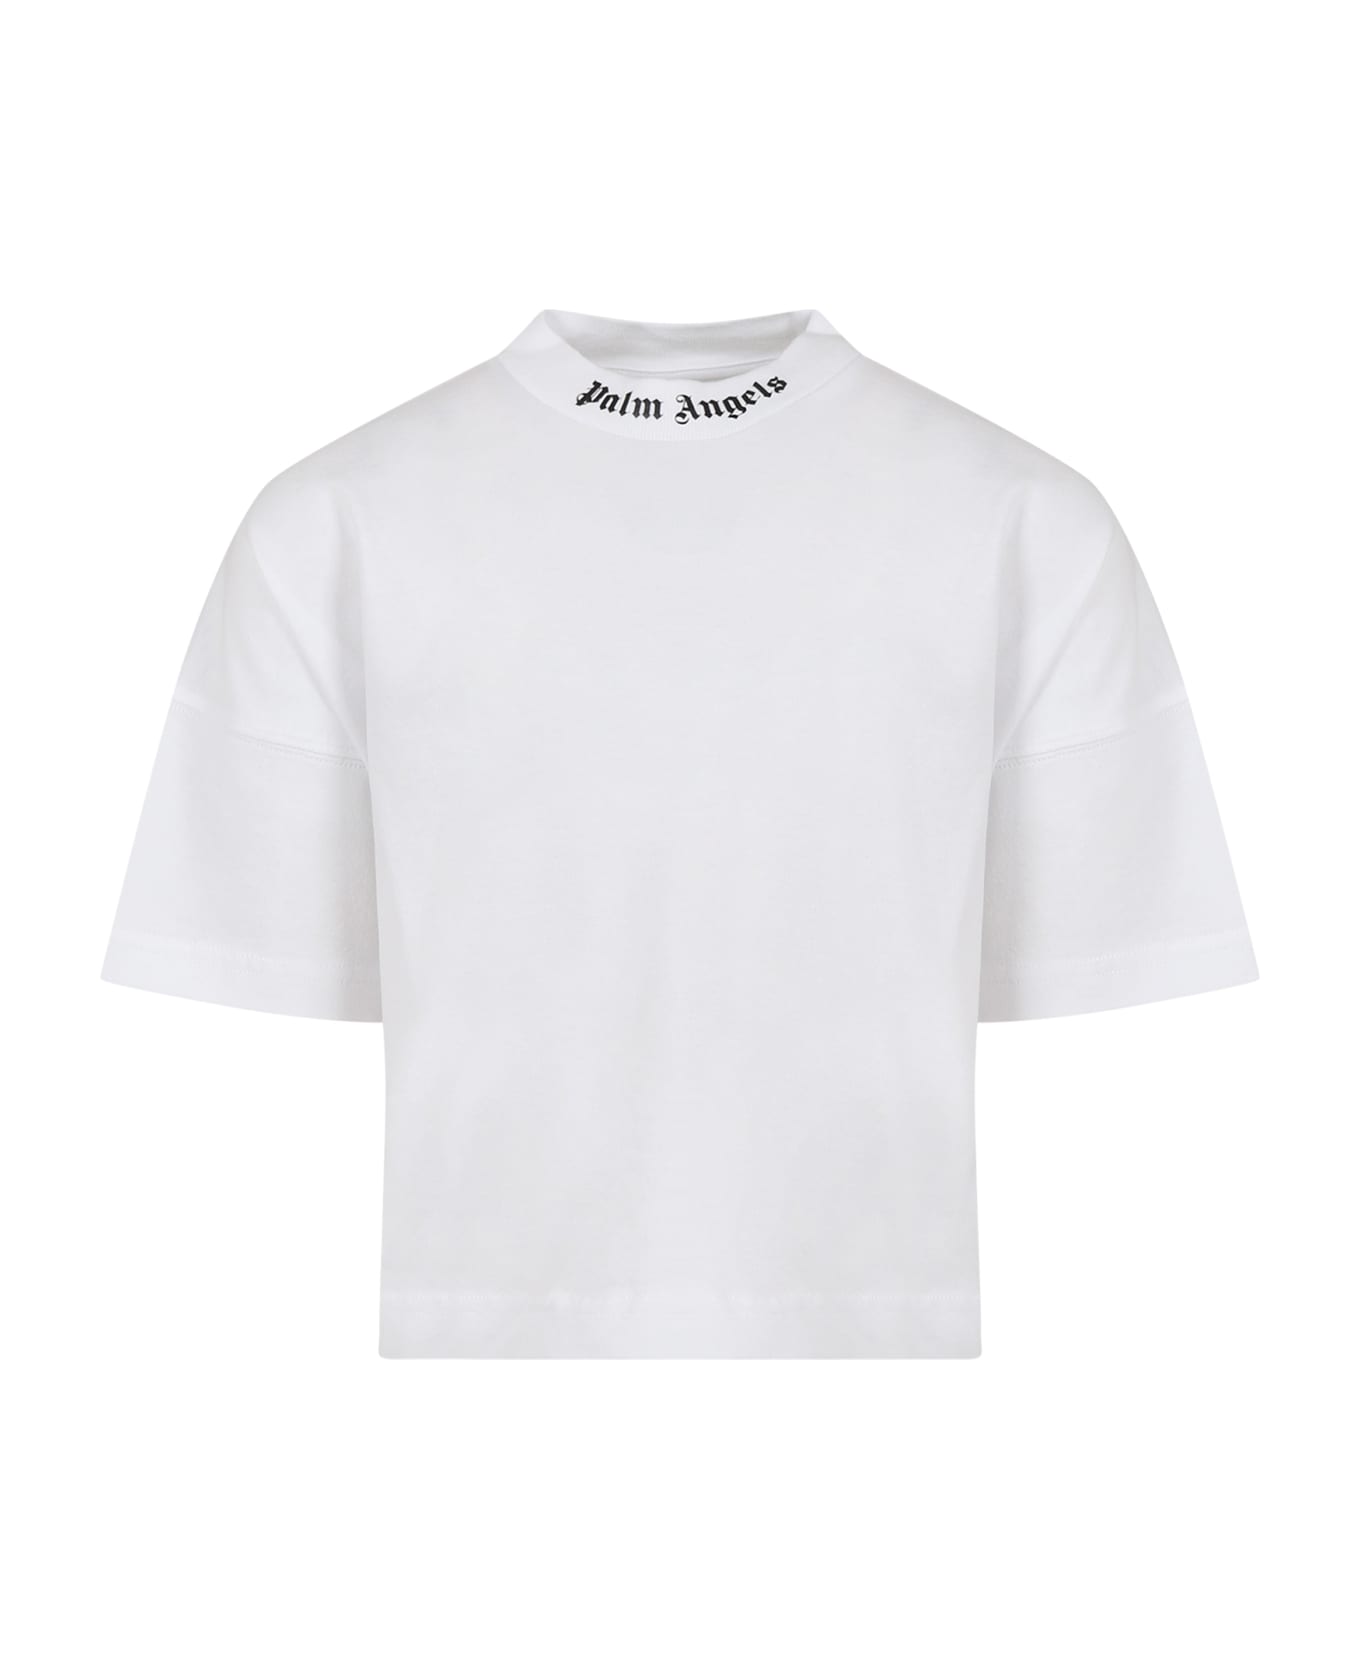 Palm Angels White T-shirt For Kids With Logo - WHITE